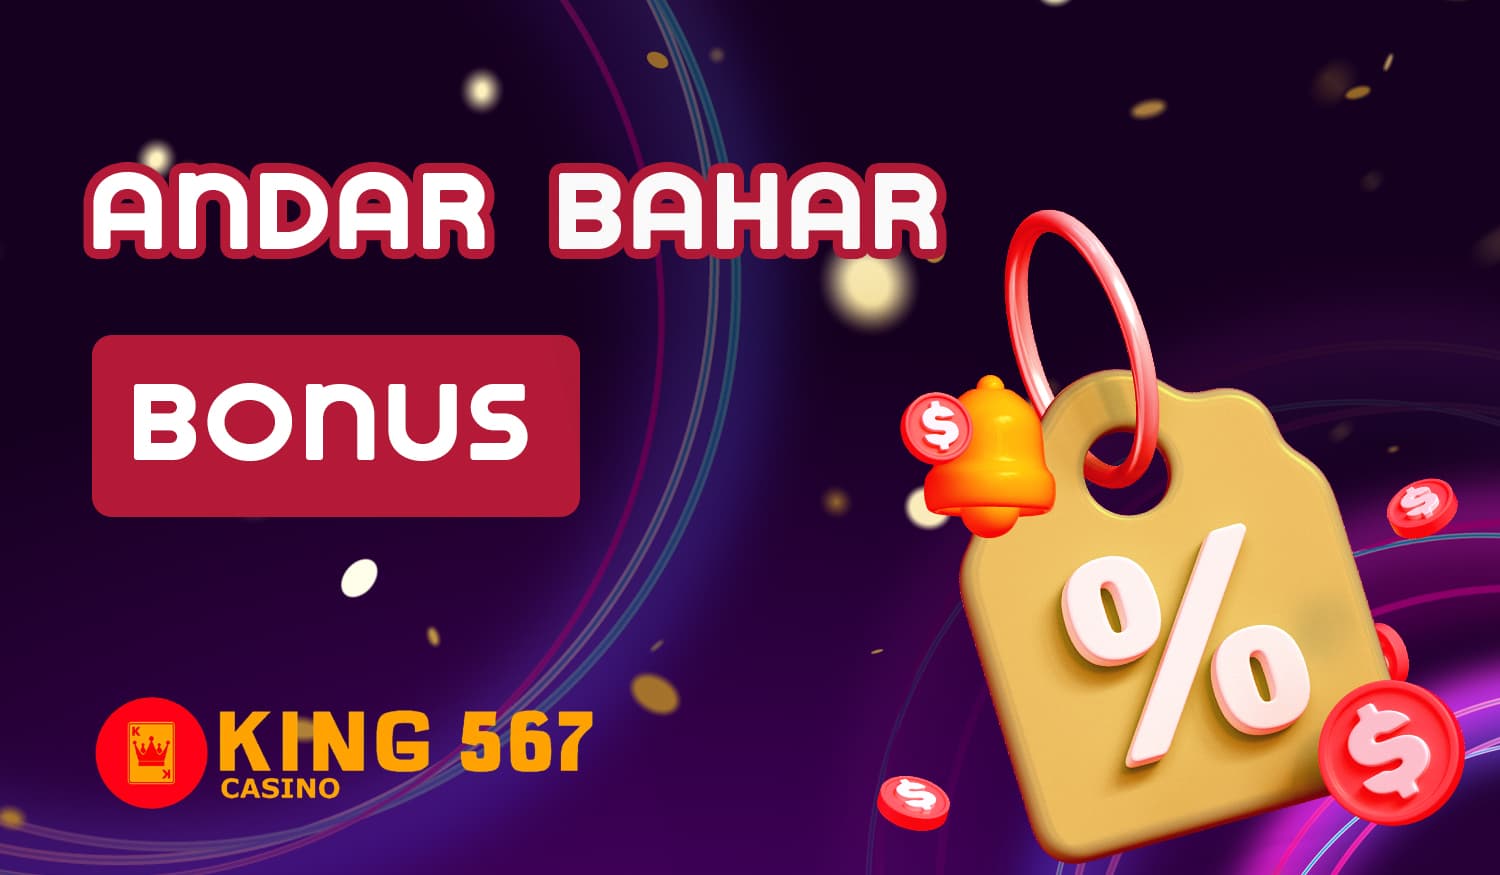 What bonus King 567 Casino offer for Indian users to play Andar Bahar? 